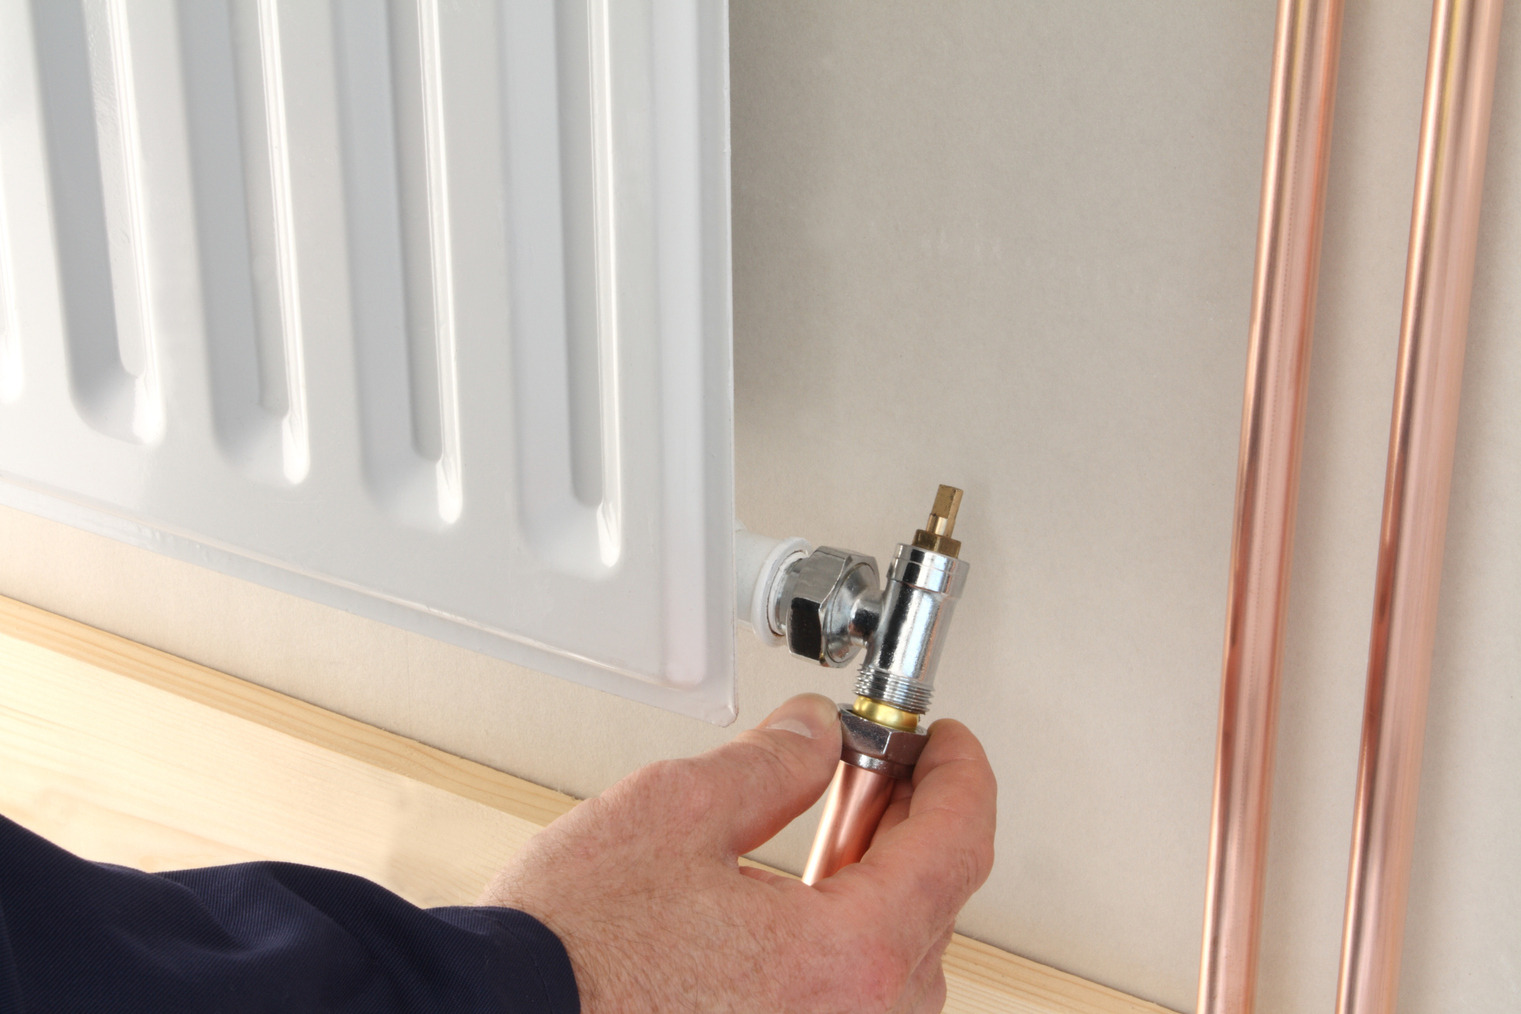 How To Bleed A Central Heating System